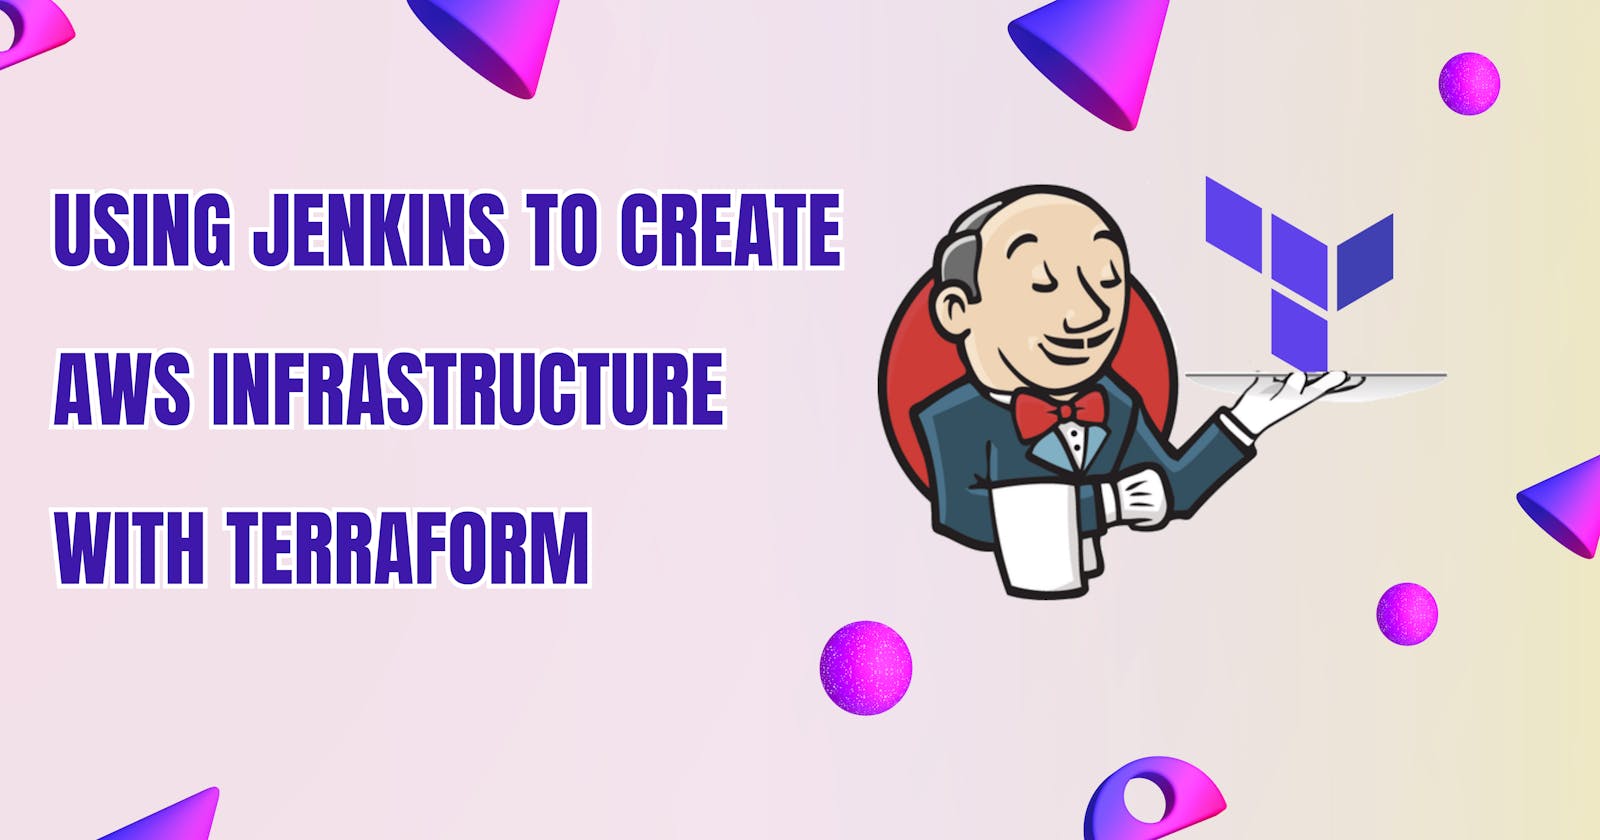 Using Jenkins to create AWS Infrastructure with Terraform.